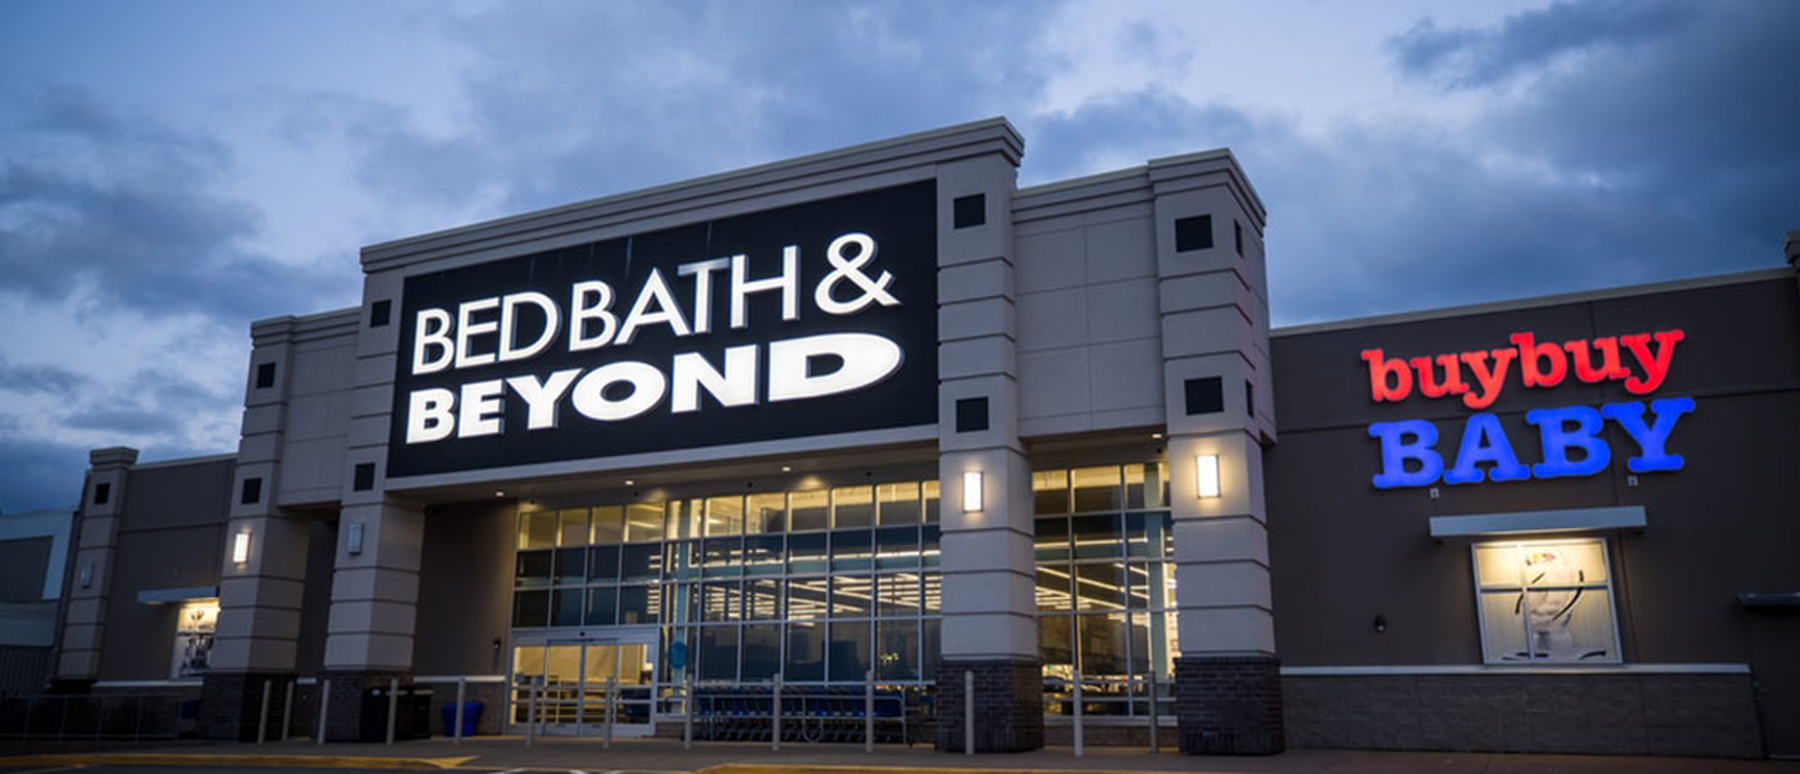 The Best Deals from the Bed Bath & Beyond and buybuy Baby Closing Sales